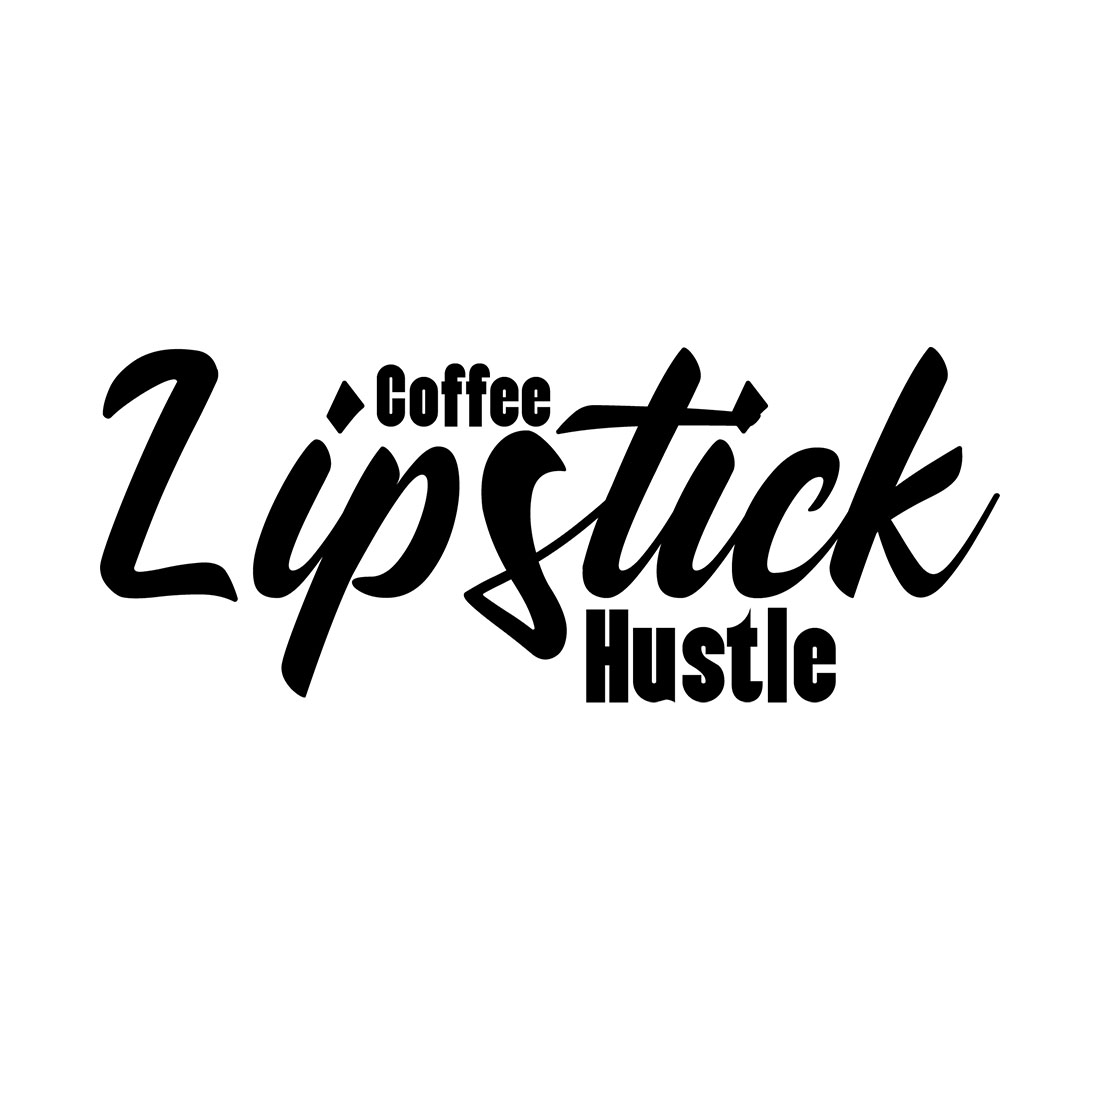 Image with gorgeous black lettering for Coffee Lipstick Hustle prints.